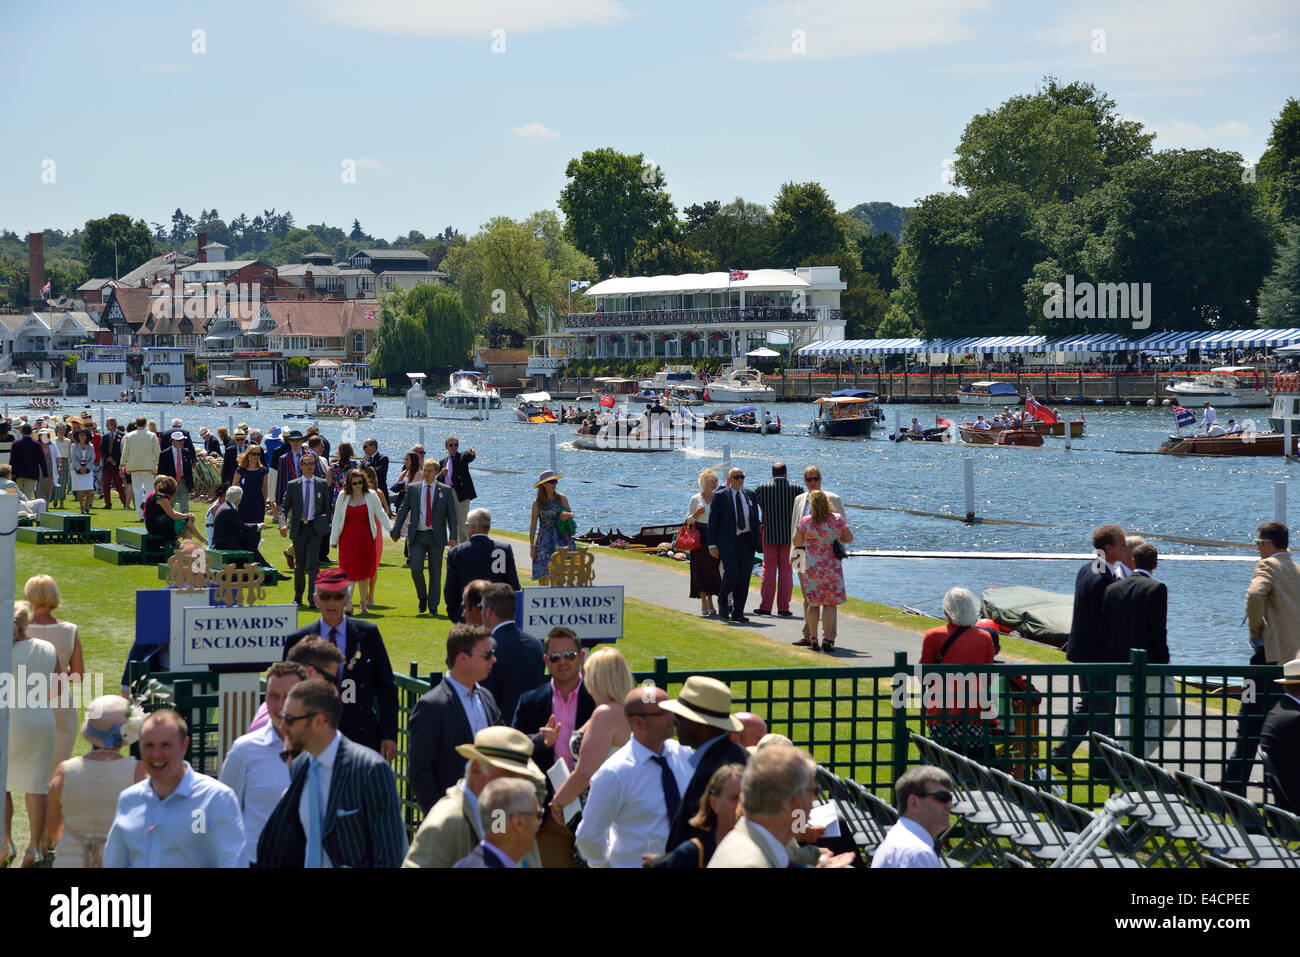 Crowds attending the rowing regatta at the Henley Royal Regatta 2014 Henley on Thames, Oxfordshire, England, UK Stock Photo